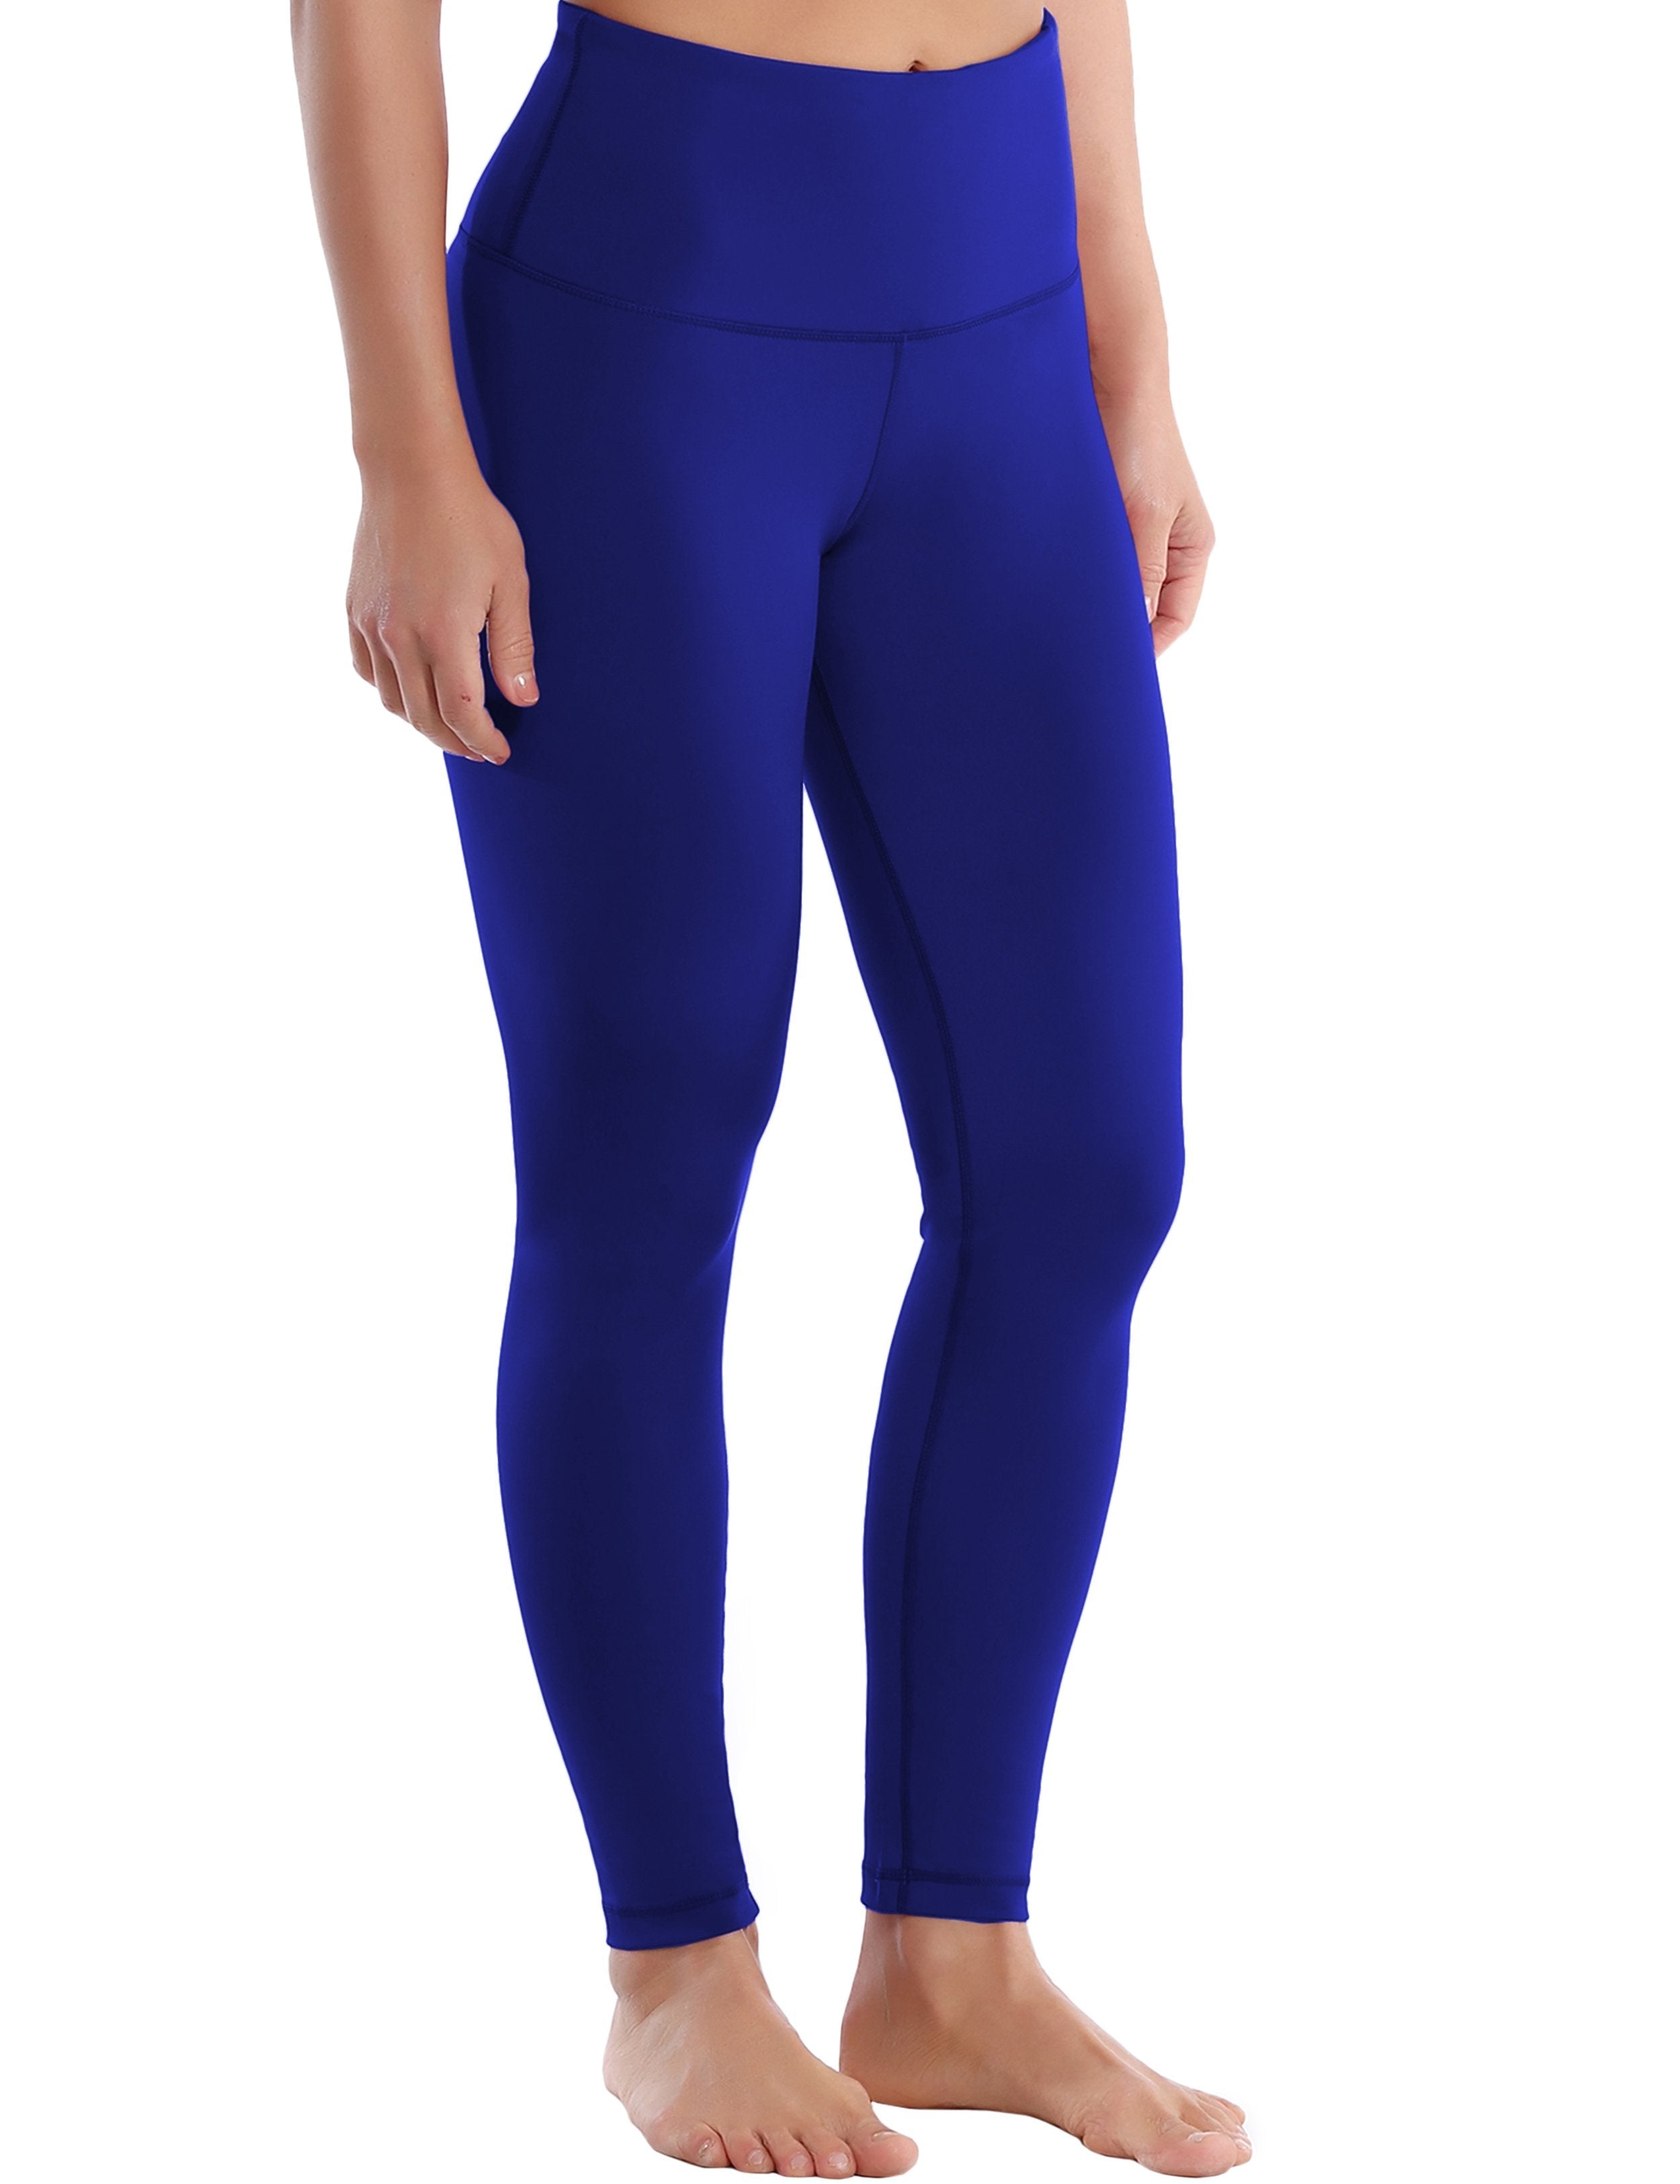 High Waist Running Pants navy 75%Nylon/25%Spandex Fabric doesn't attract lint easily 4-way stretch No see-through Moisture-wicking Tummy control Inner pocket Four lengths